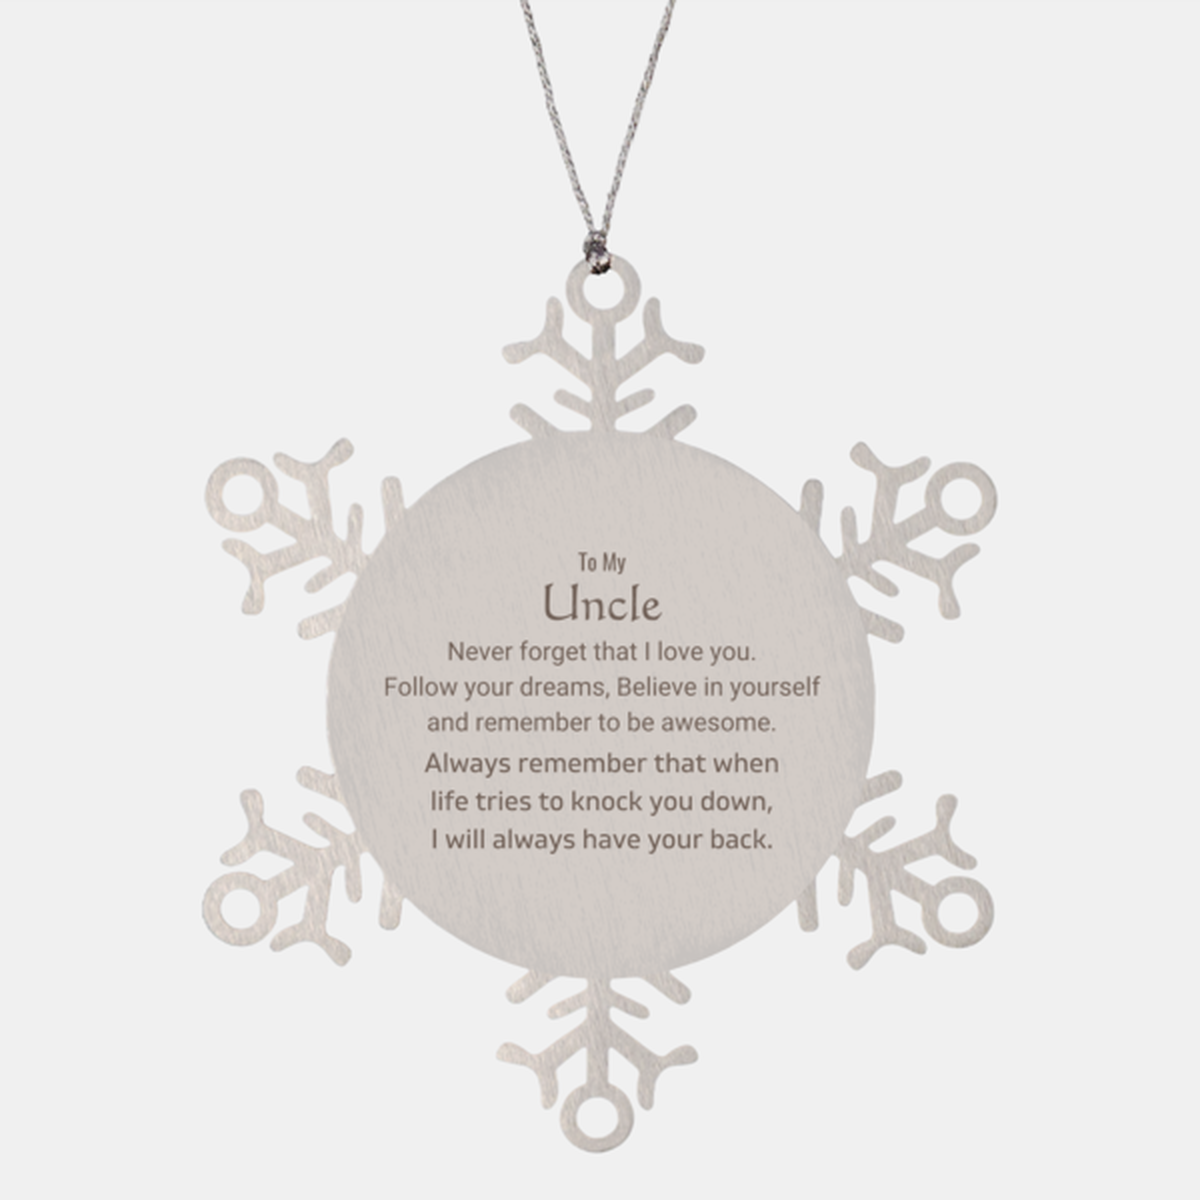 Inspirational Gifts for Uncle, Follow your dreams, Believe in yourself, Uncle Snowflake Ornament, Birthday Christmas Unique Gifts For Uncle